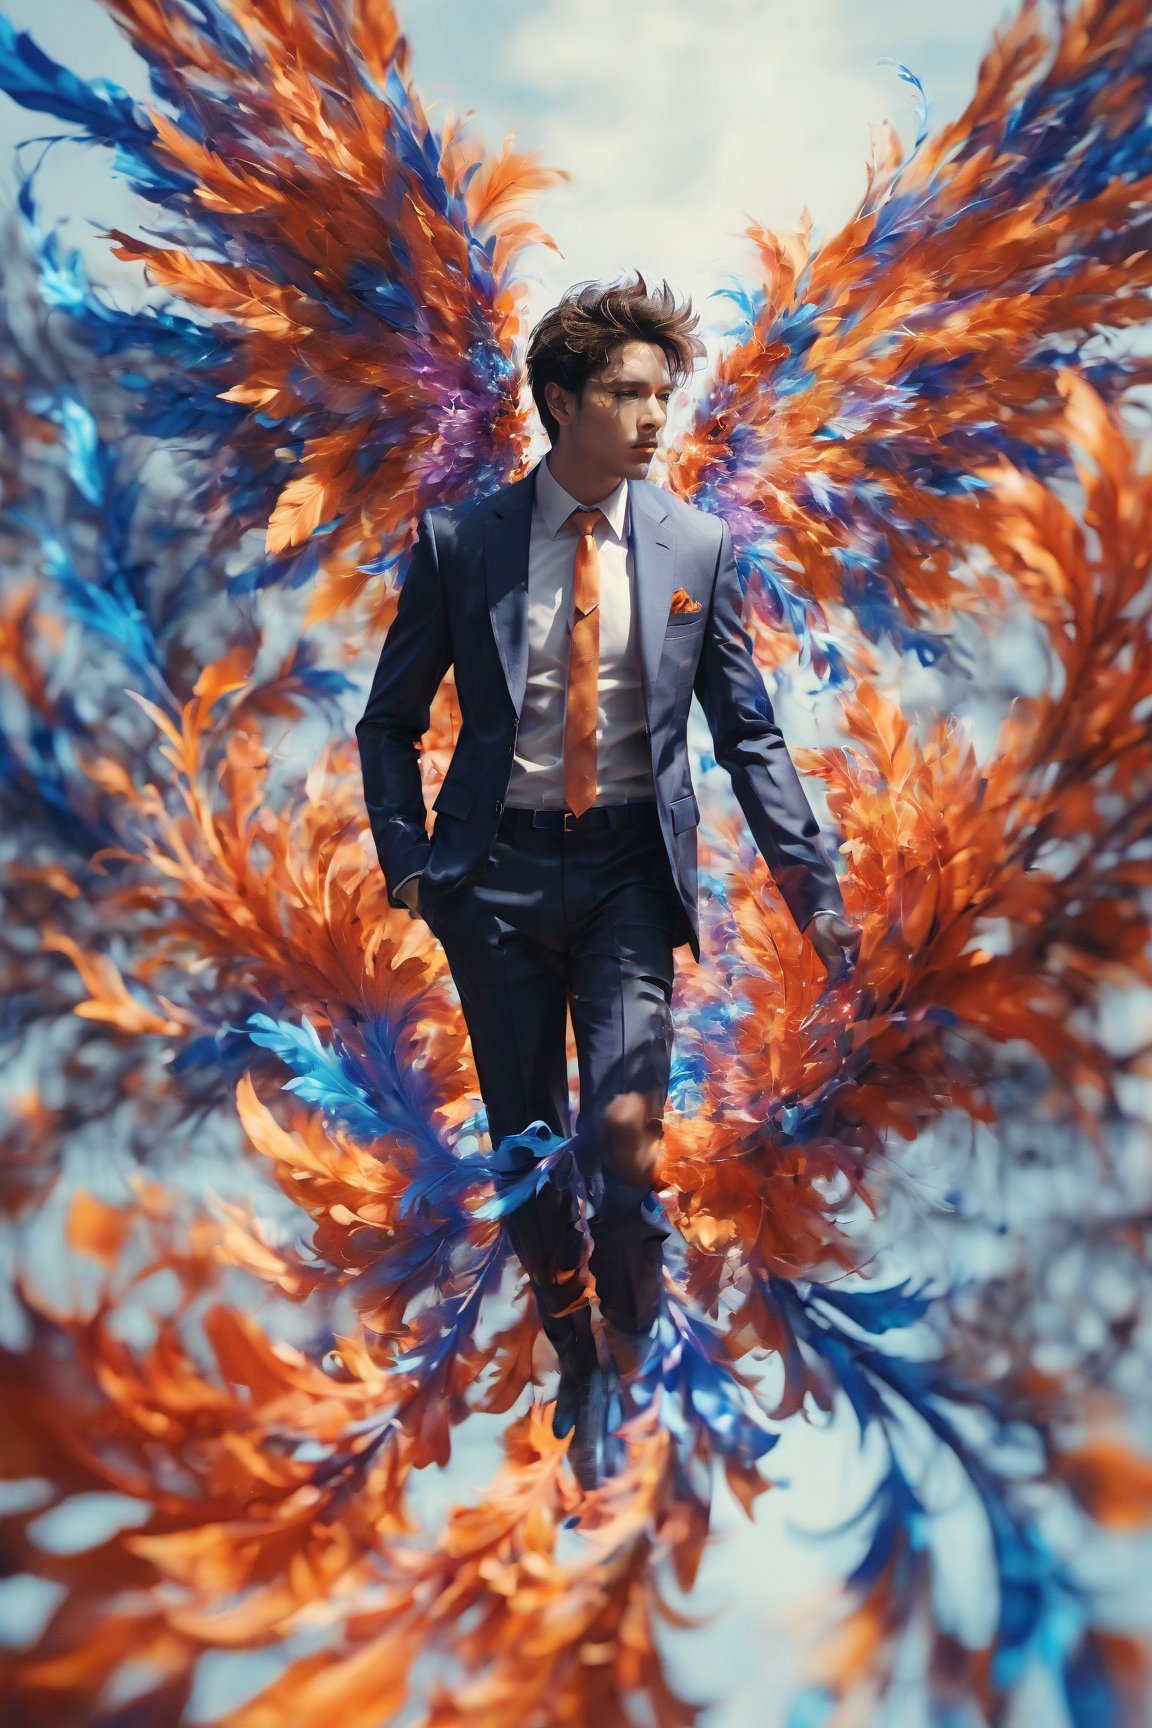 Create an image of a young man wearing a suit, featuring vibrant, blue wings extending from his back. Random movement The background should be plain white, emphasizing the contrast and detailing of the beauty wings and the sharpness of the suit. The man should appear poised and elegant, with the wings unfurled to showcase a spectrum of vivid hues, blending seamlessly from one color to another. The focus should be on the meticulous details of the wings’ feathers and the suit’s fabric, capturing a harmonious blend of natural and refined elements, wings,Stylish, close up,l3min,xxmixgirl,fire element,wings